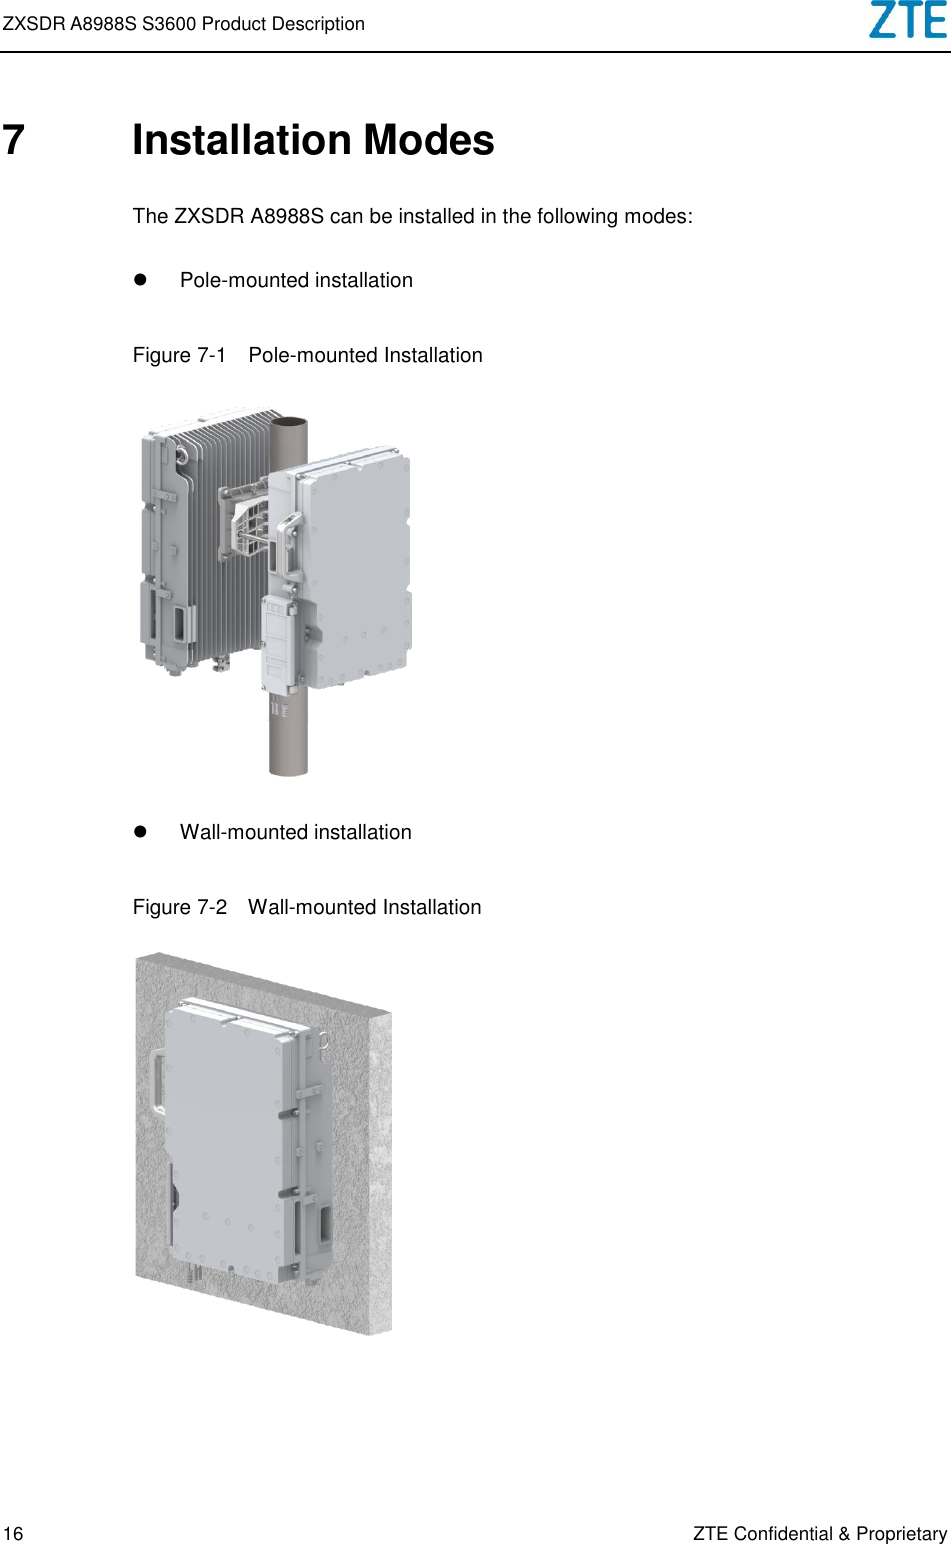 Page 18 of ZTE A8988SS3600 LTE Remote Radio Unit User Manual ZXSDR A8988S S3600 Product Description